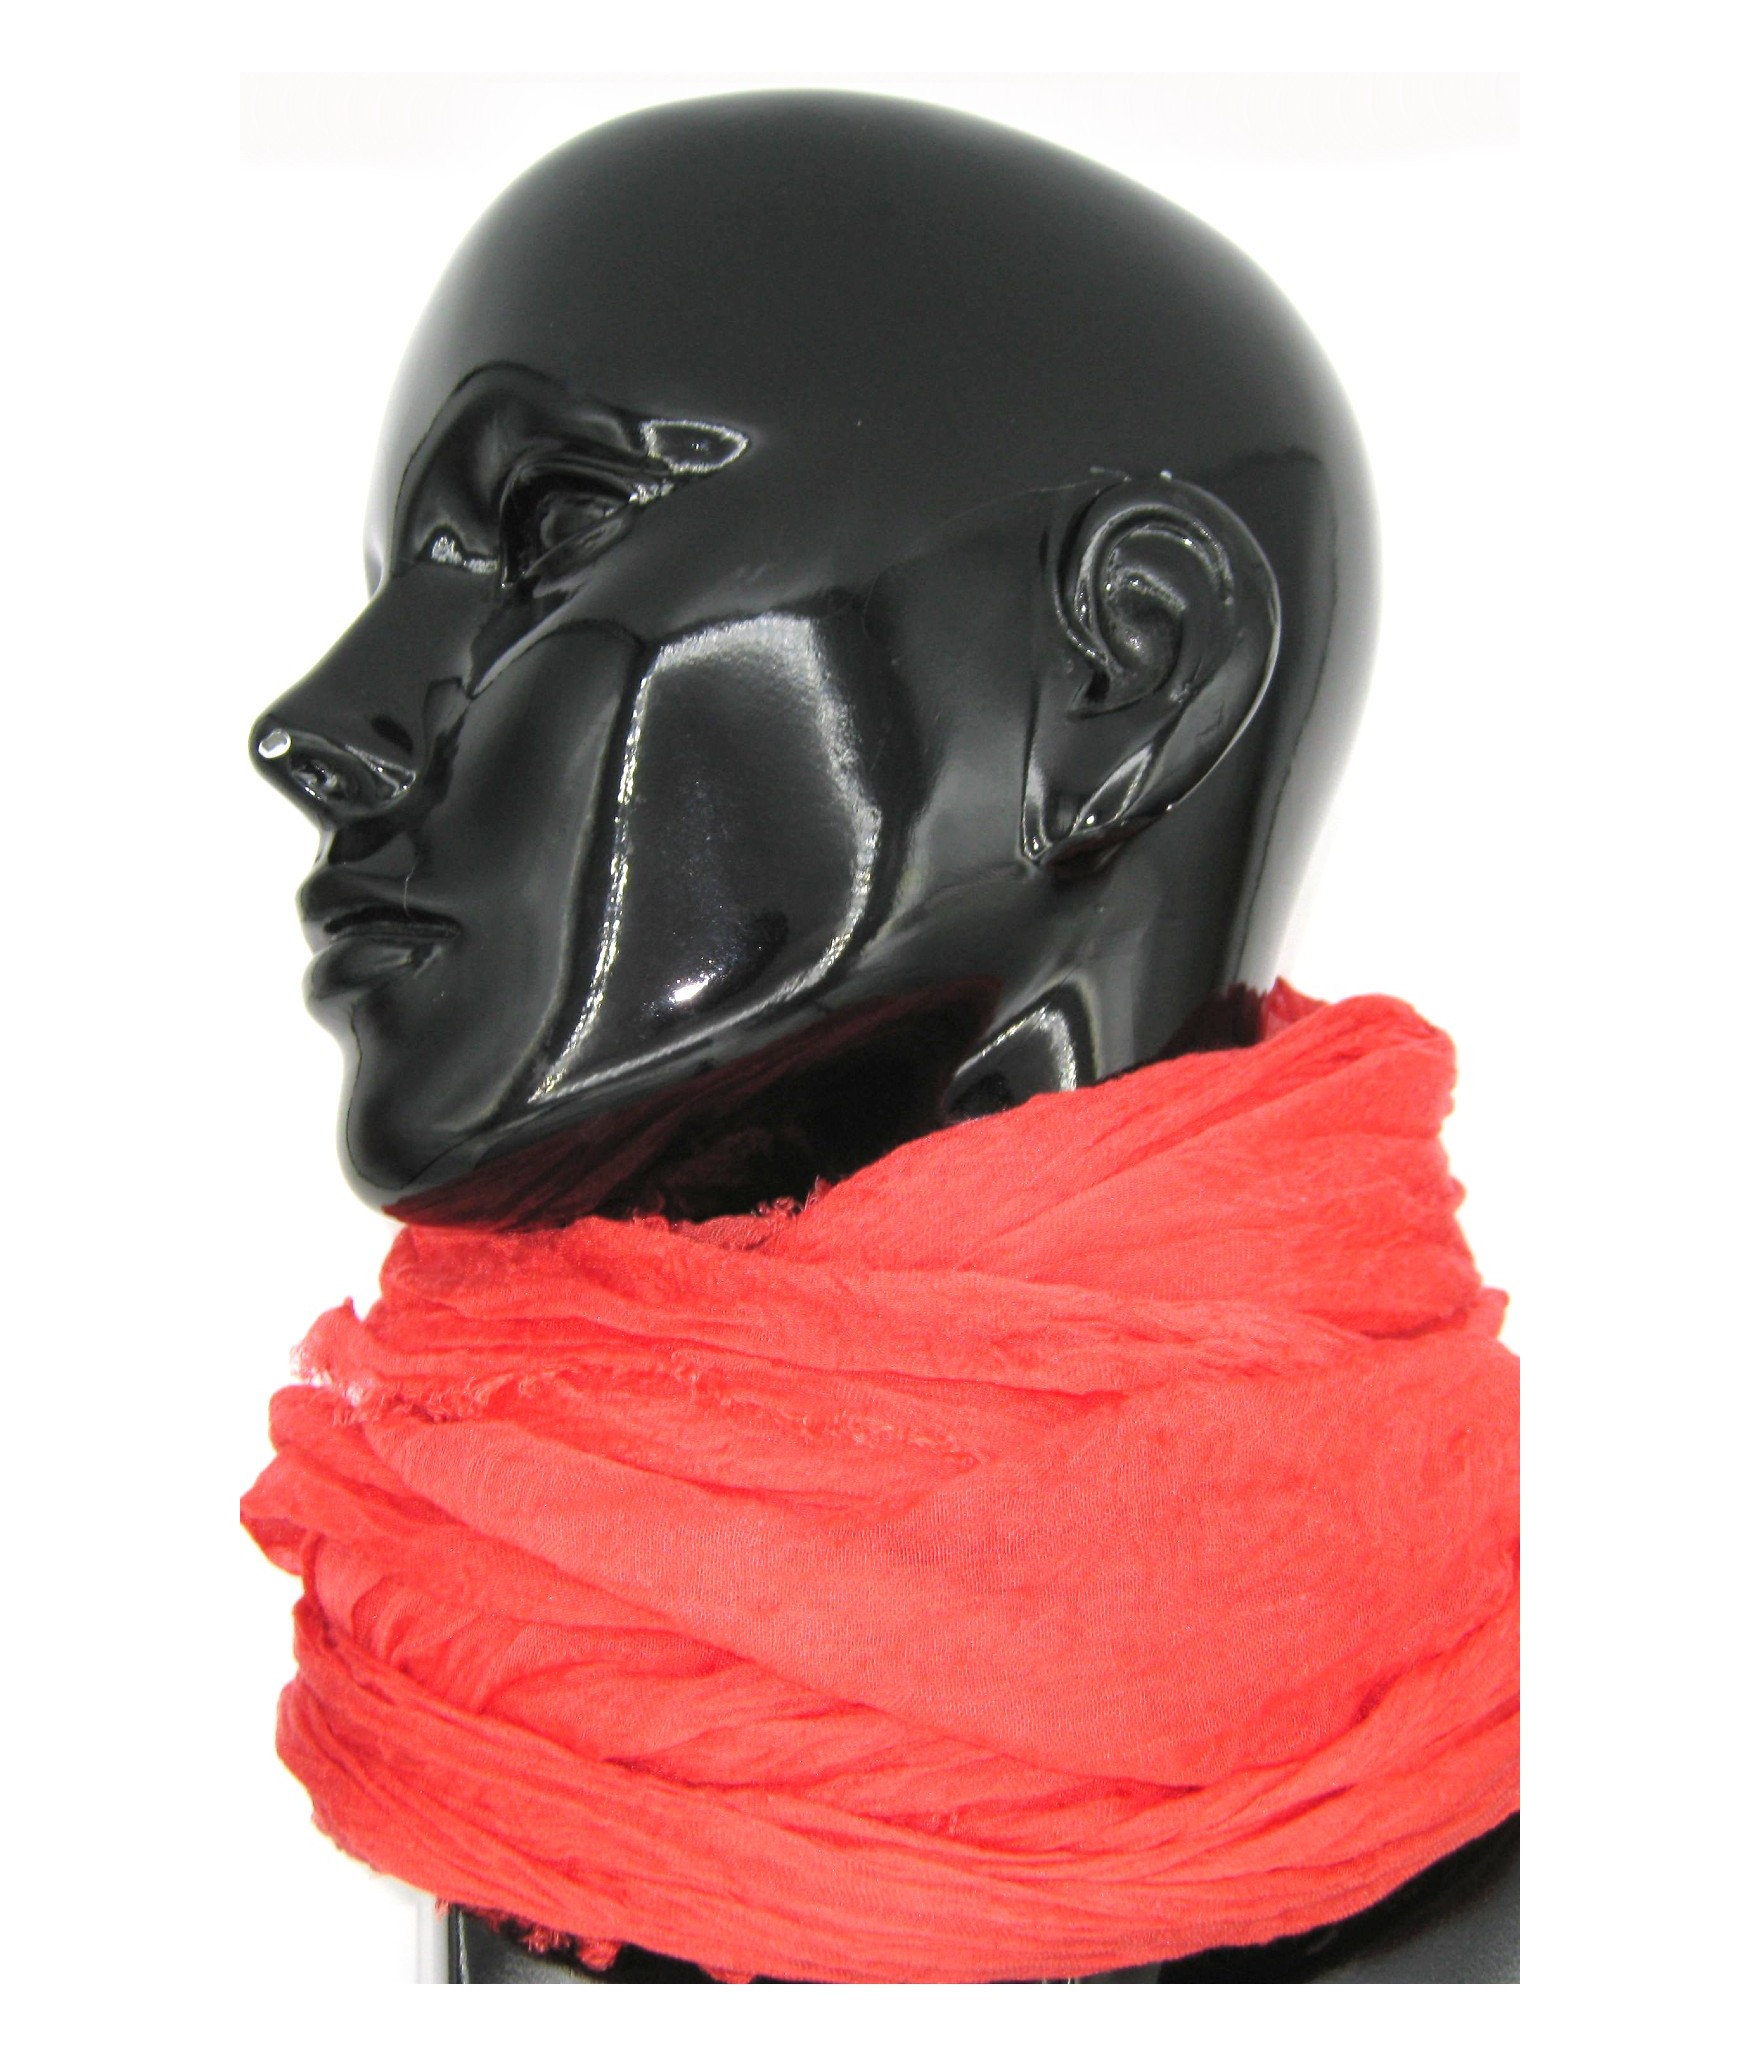 Accessories Woman Scarves & Foulards Ladies Stole in Modal and